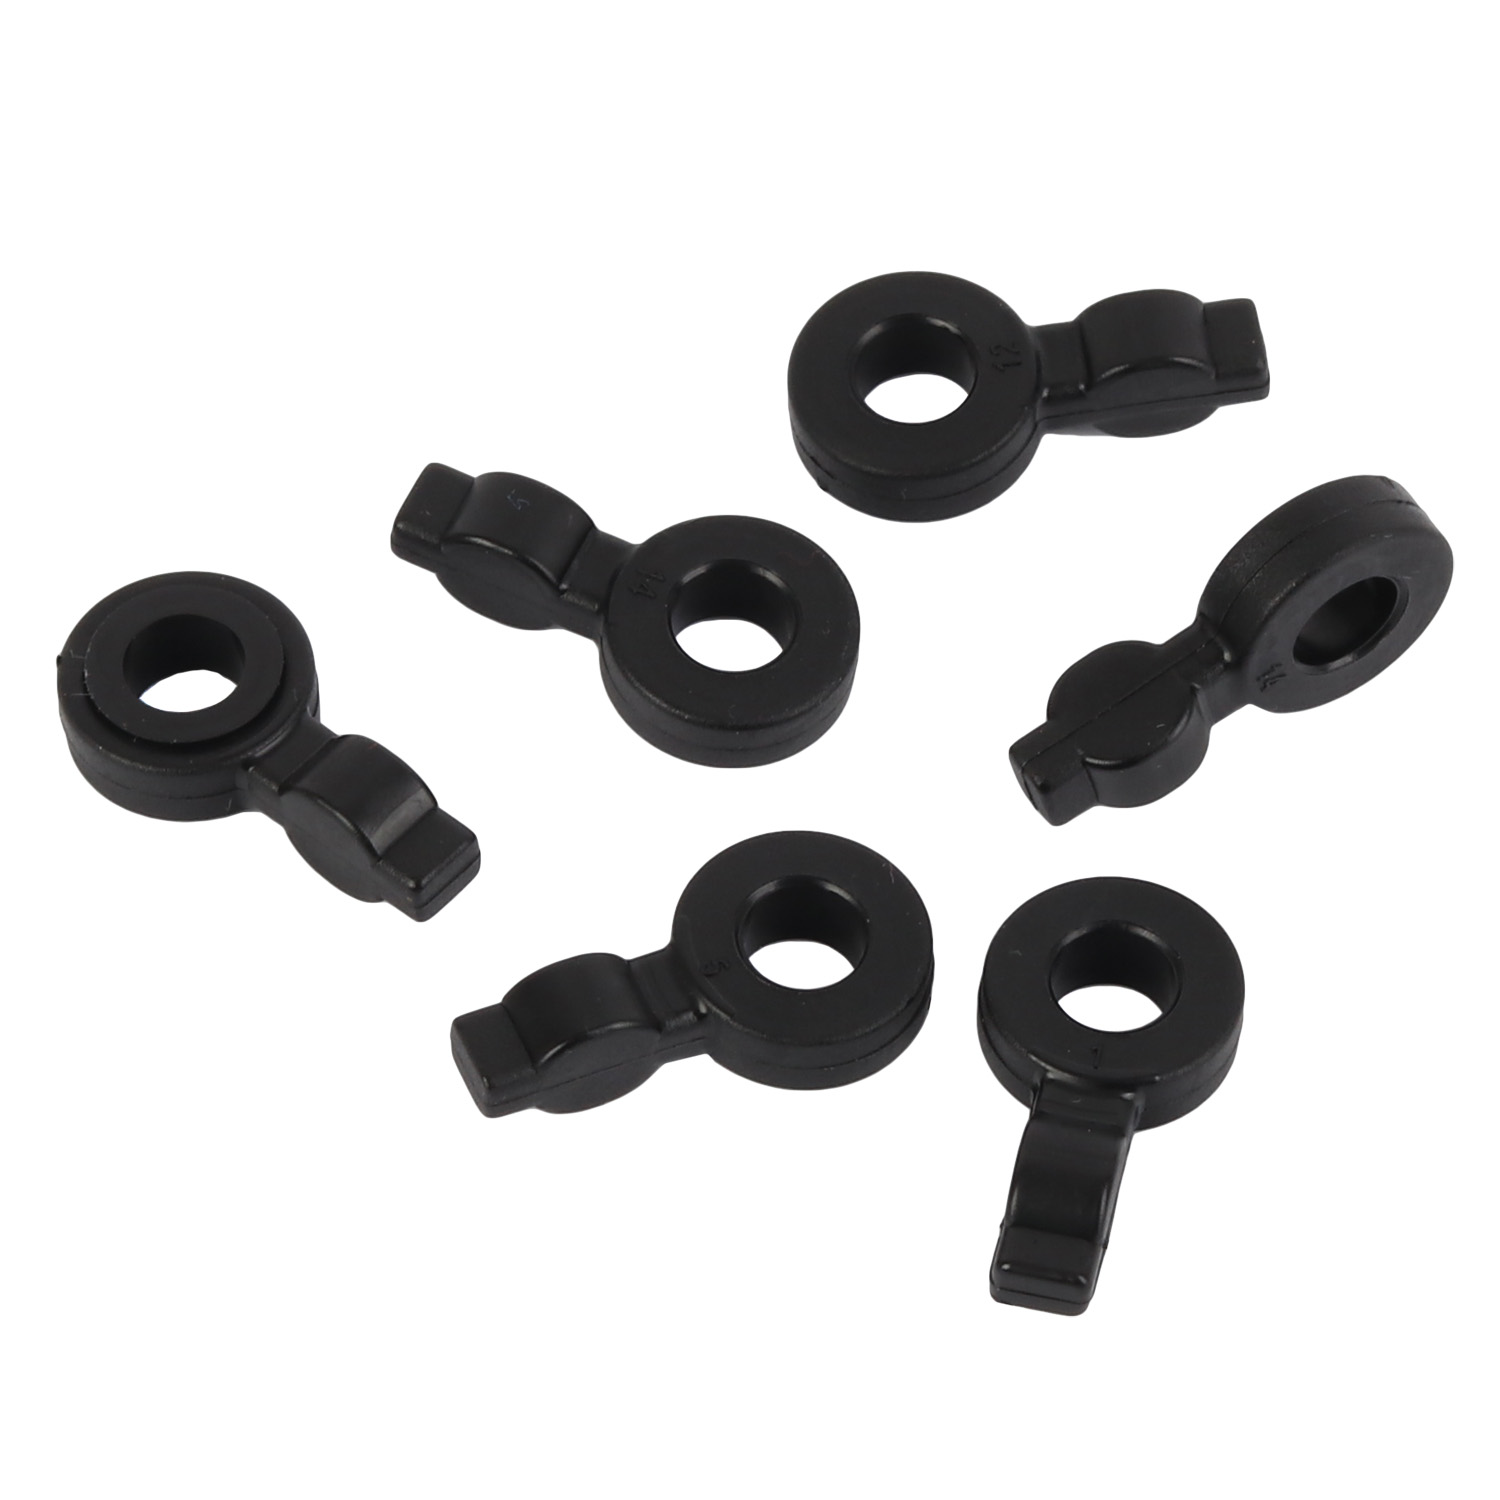 Picture of SKS Cylinder Plug for Fenders (6 Pieces)